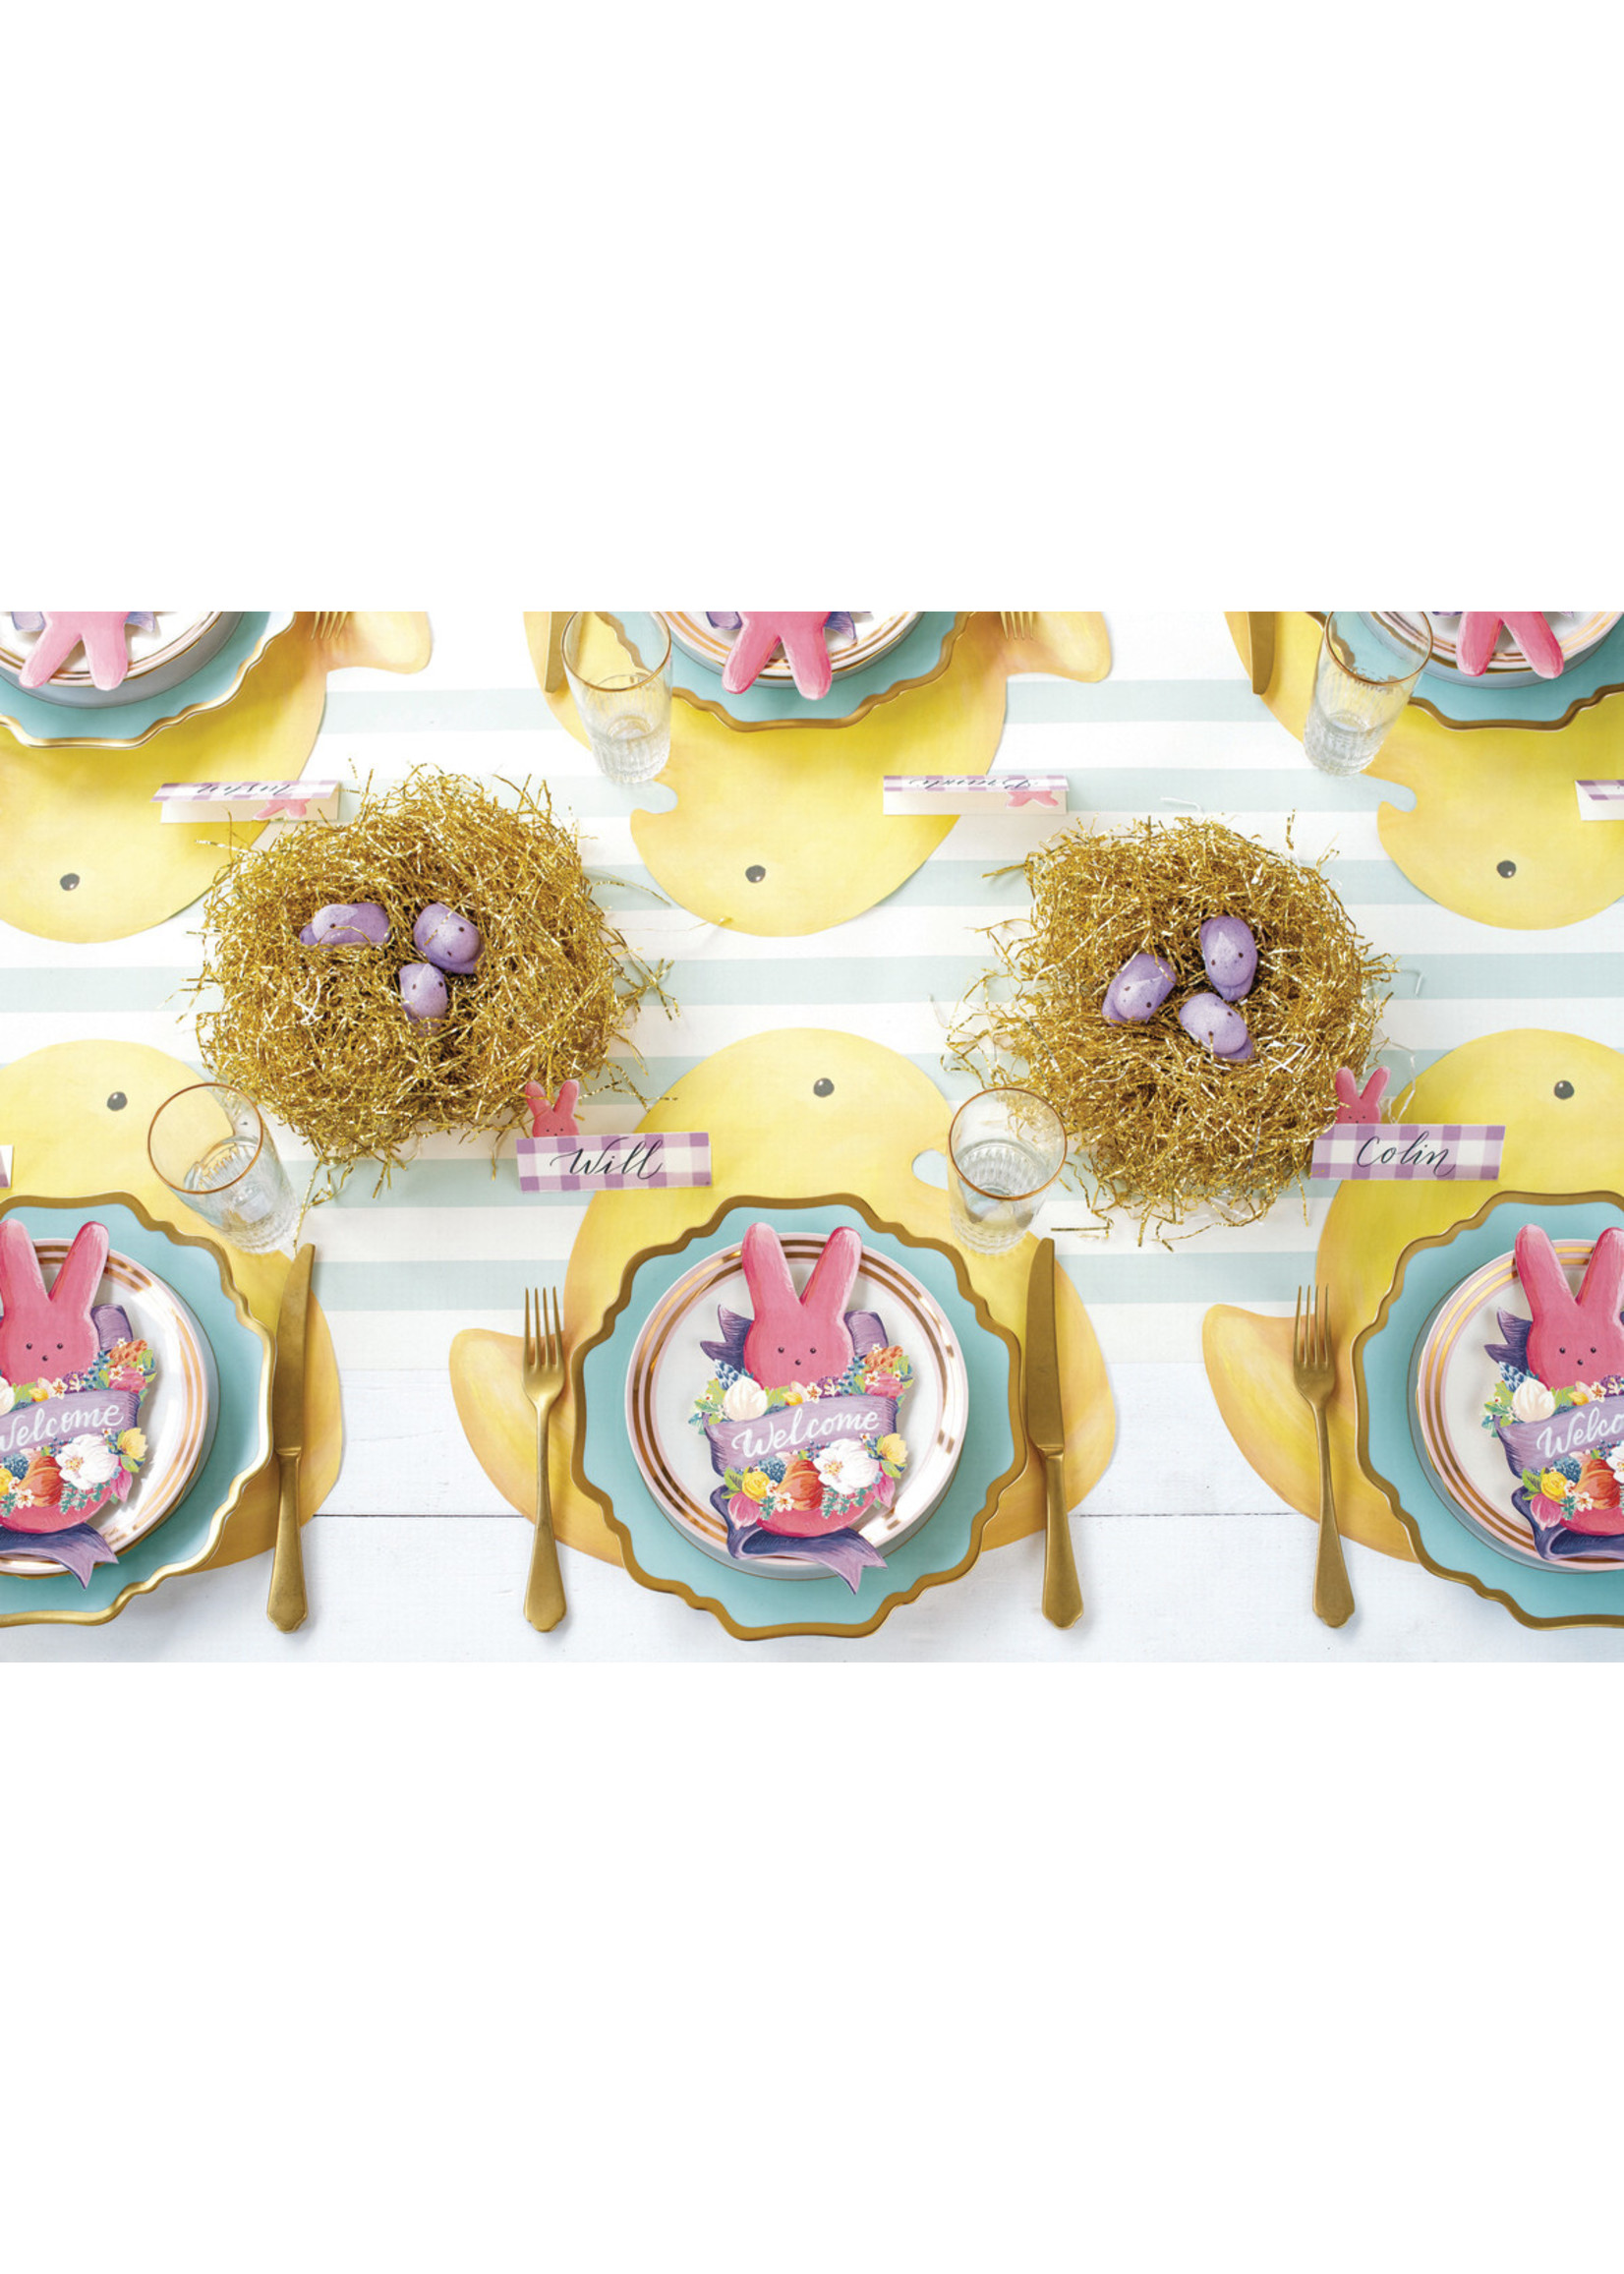 Hester & Cook Paper Placemats - PEEPS Chicks (12 sheets)